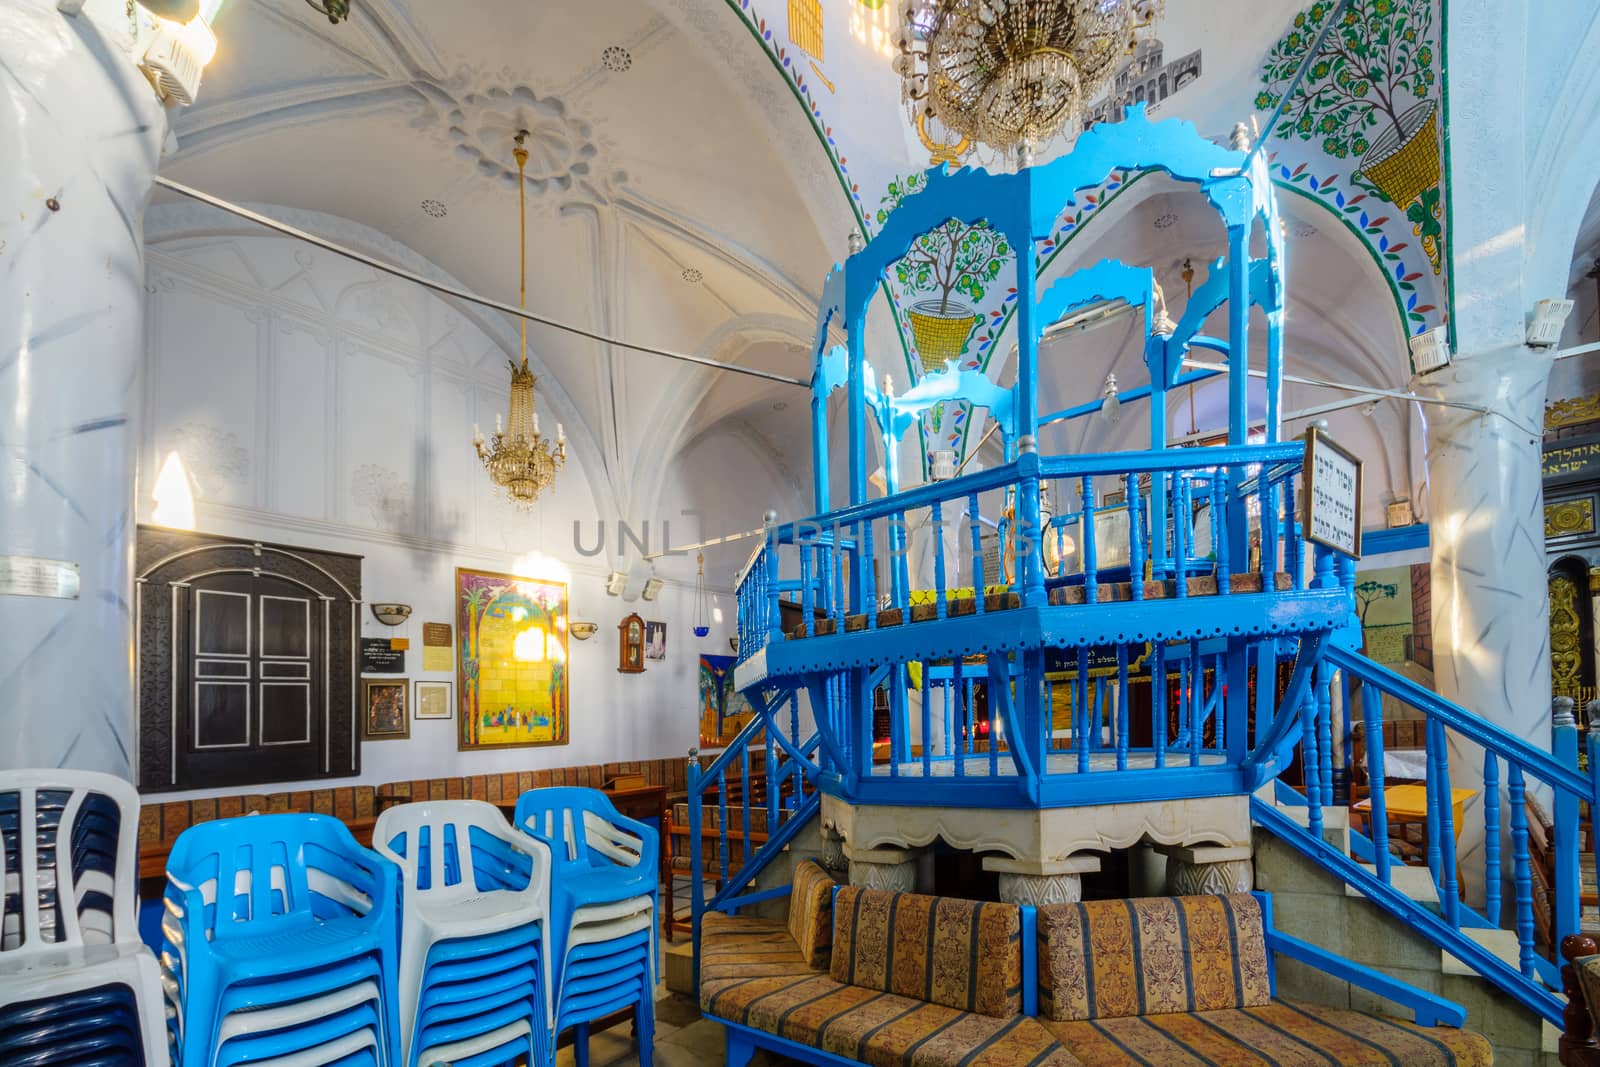 The Abuhav Synagogue, in the Jewish quarter, Safed (Tzfat) by RnDmS